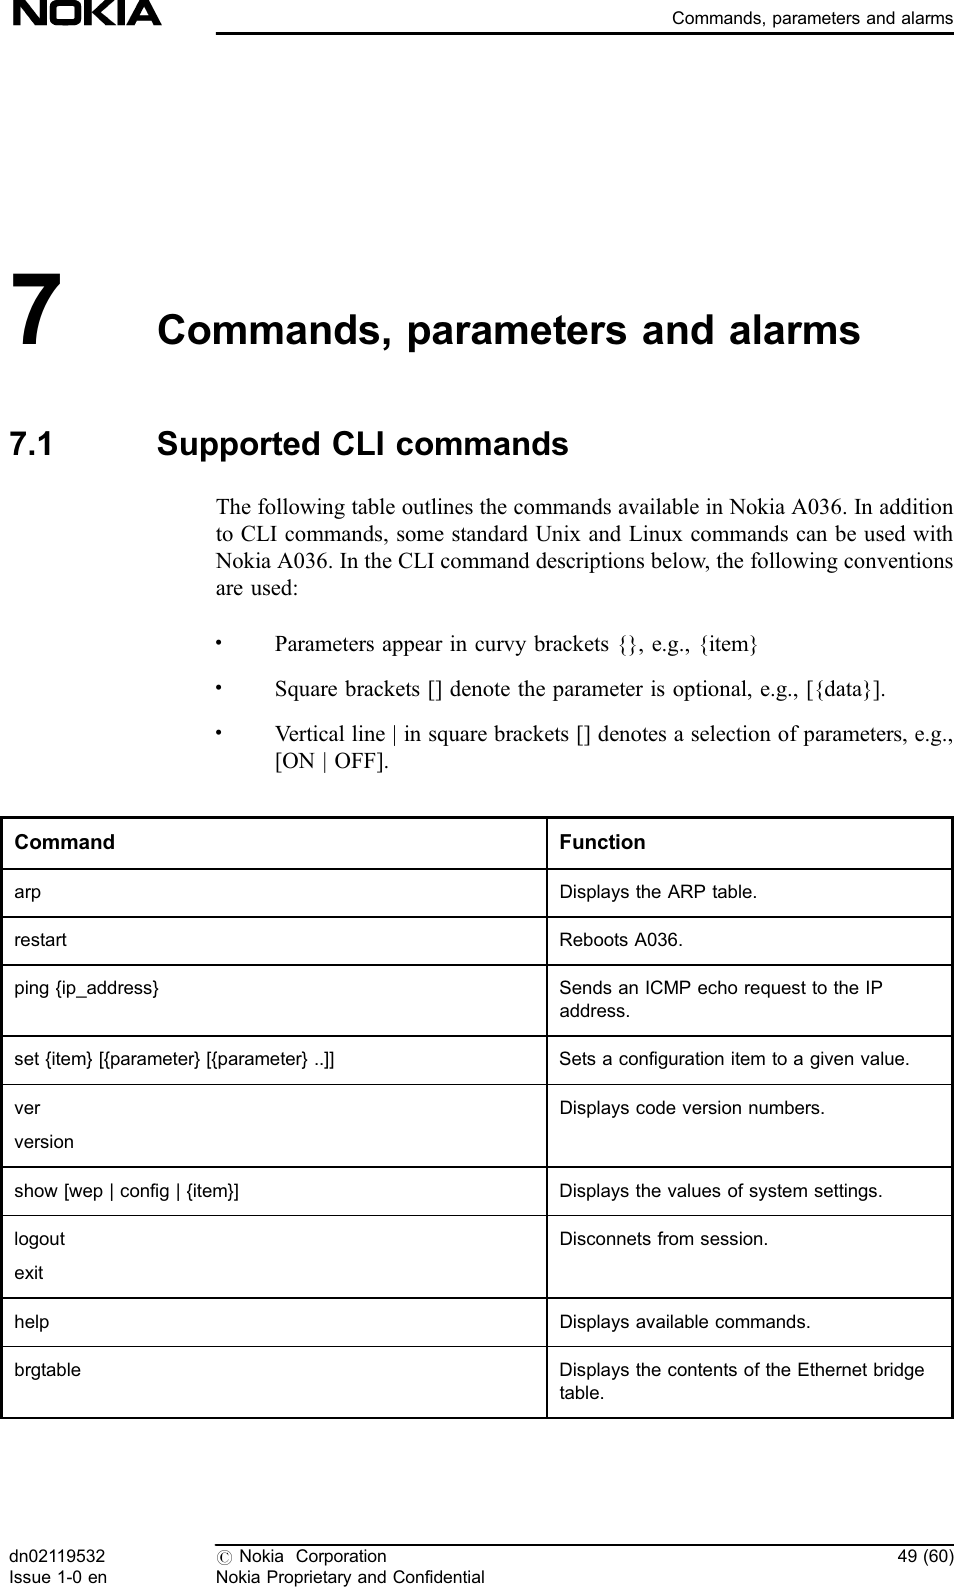 7Commands, parameters and alarms7.1 Supported CLI commandsThe following table outlines the commands available in Nokia A036. In additionto CLI commands, some standard Unix and Linux commands can be used withNokia A036. In the CLI command descriptions below, the following conventionsare used:.Parameters appear in curvy brackets {}, e.g., {item}.Square brackets [] denote the parameter is optional, e.g., [{data}]..Vertical line | in square brackets [] denotes a selection of parameters, e.g.,[ON | OFF].Command Functionarp Displays the ARP table.restart Reboots A036.ping {ip_address} Sends an ICMP echo request to the IPaddress.set {item} [{parameter} [{parameter} ..]] Sets a configuration item to a given value.verversionDisplays code version numbers.show [wep | config | {item}] Displays the values of system settings.logoutexitDisconnets from session.help Displays available commands.brgtable Displays the contents of the Ethernet bridgetable.dn02119532Issue 1-0 en#Nokia CorporationNokia Proprietary and Confidential49 (60)Commands, parameters and alarms